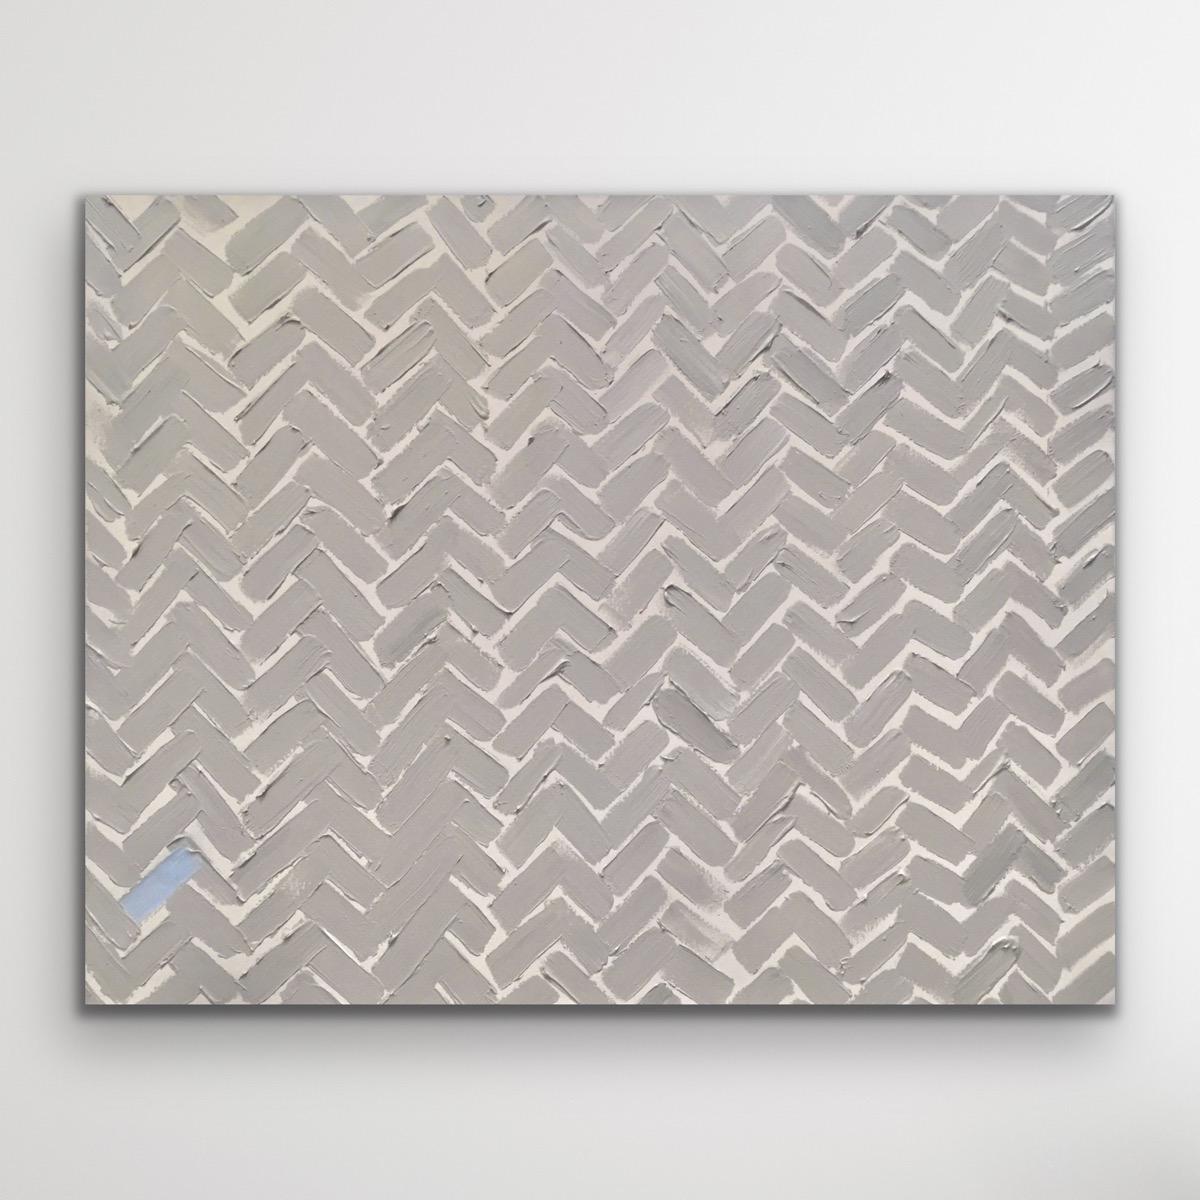 This contemporary abstract painting places emphasis on simplified composition. A heavy, textured herringbone pattern created with lush brush stokes adds dimension, inviting the viewer to experience an immediate, purely visual response. The